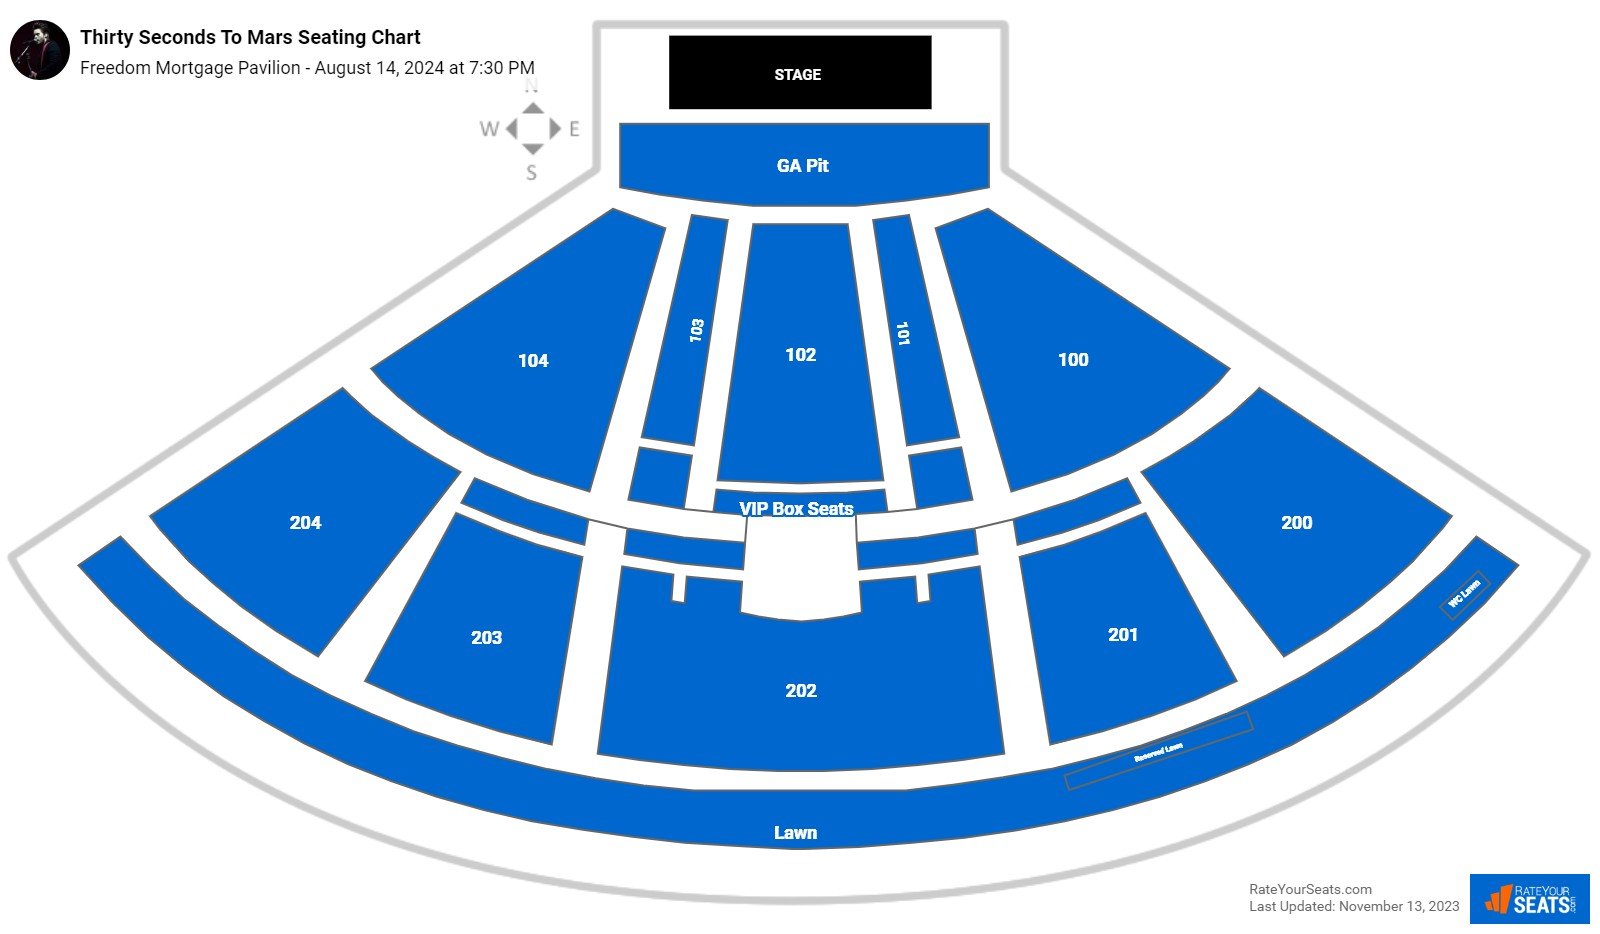 Thirty Seconds To Mars seating chart Freedom Mortgage Pavilion